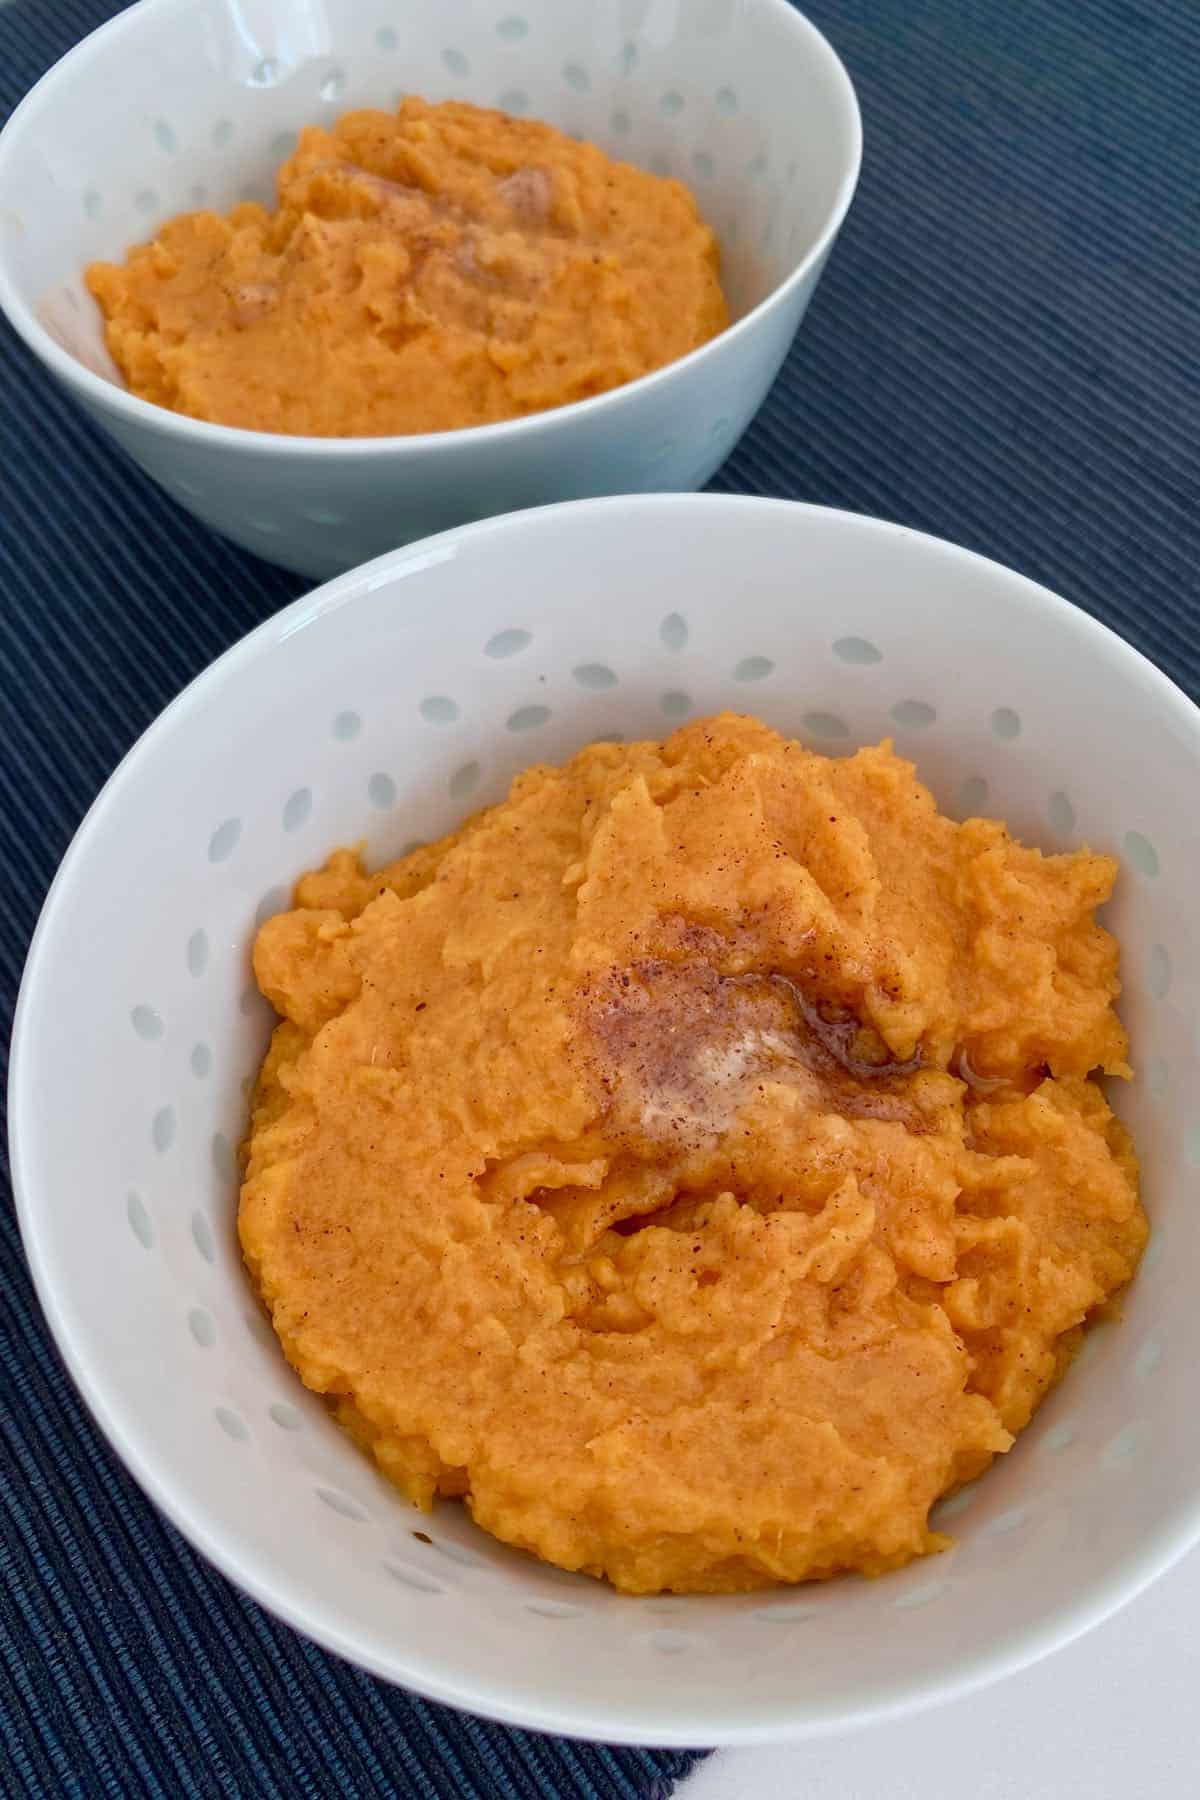 A serving of mashed sweet potatoes